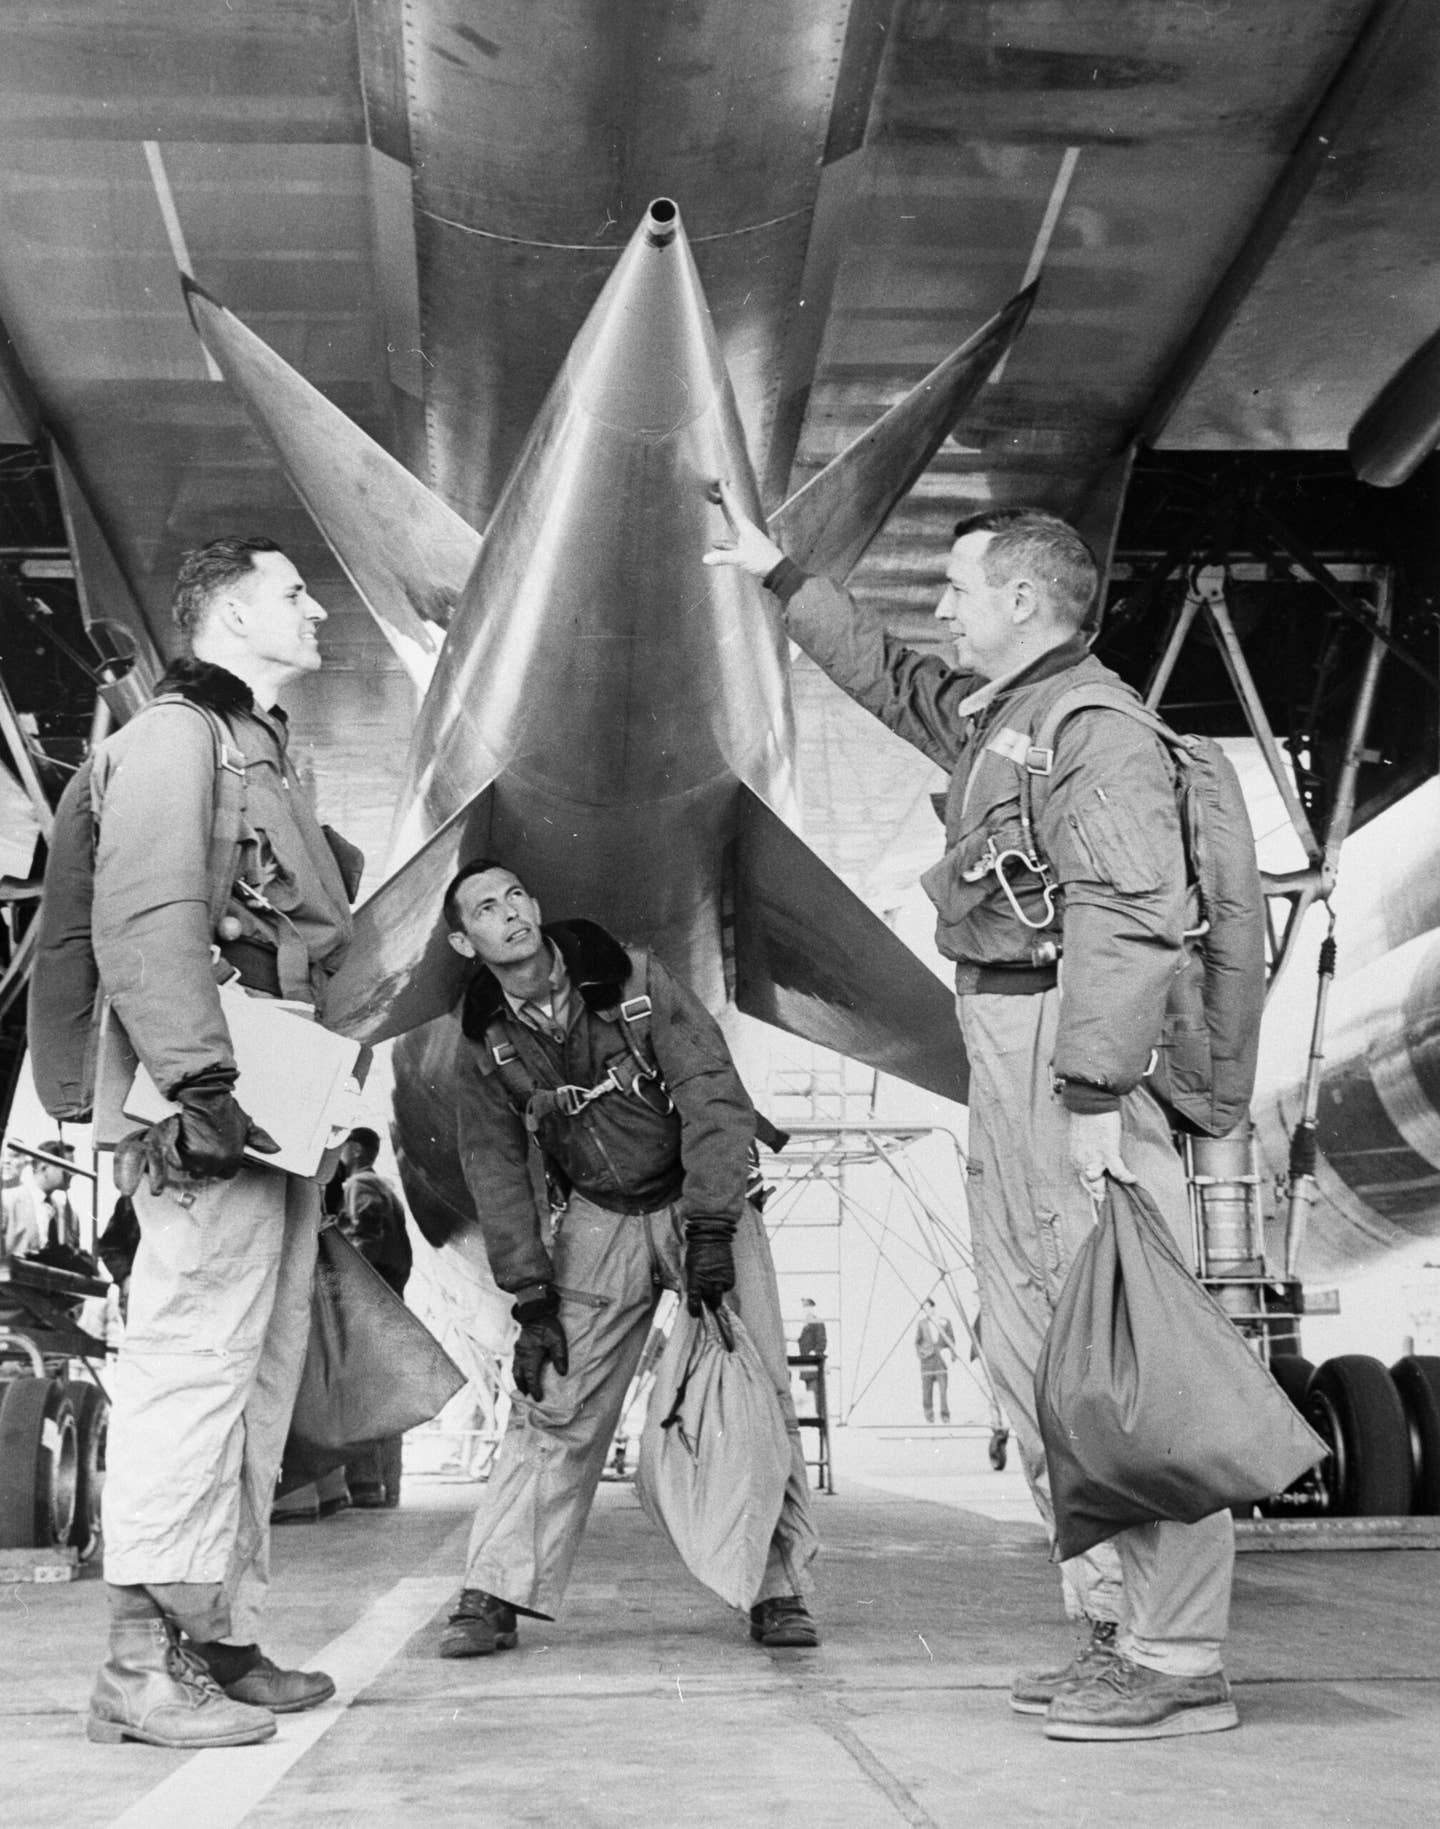 A flight-test crew inspects the detachable pod on a B-58, at the Convair plant in Fort Worth, Texas, in 1957. From left to right are the Defensive System Operator, test engineer, and pilot. <em>Photo by Metro/BIPs/Getty Images</em>